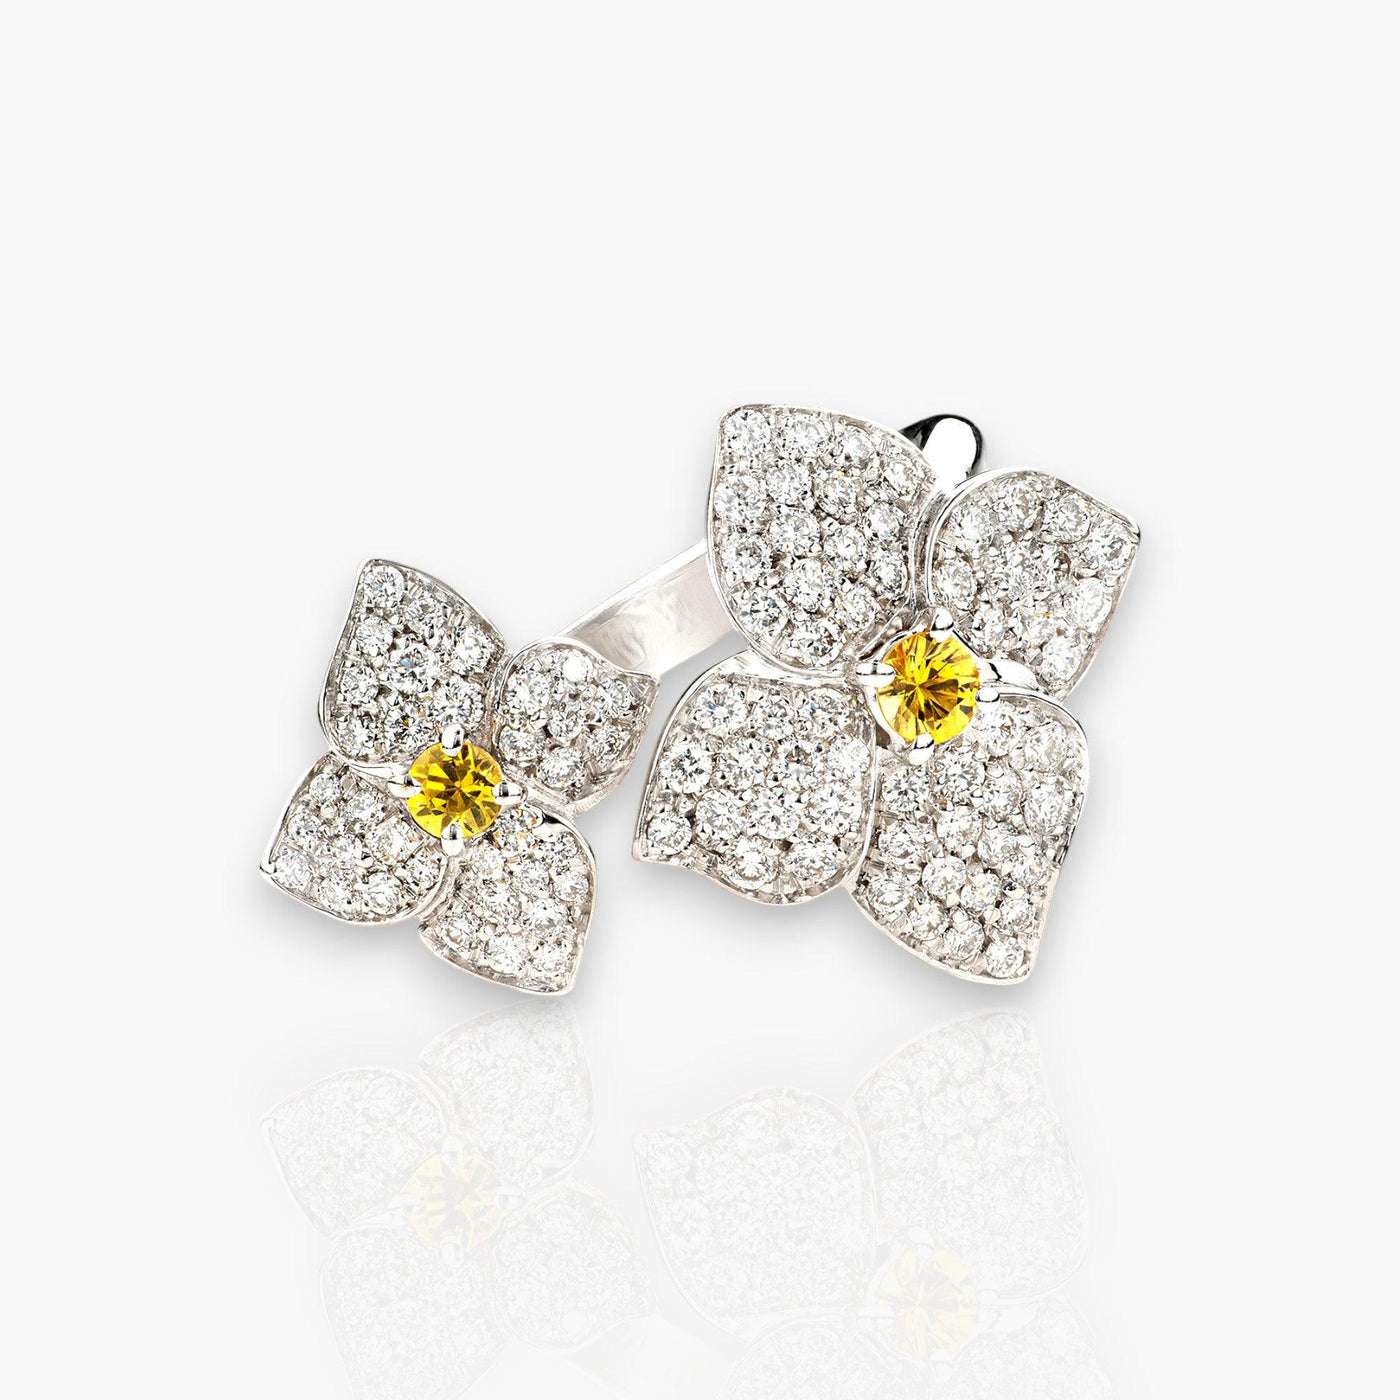 Ortensia Ring Double Flower, White Gold, Diamonds And Yellow Sapphire - Moregola Fine Jewelry